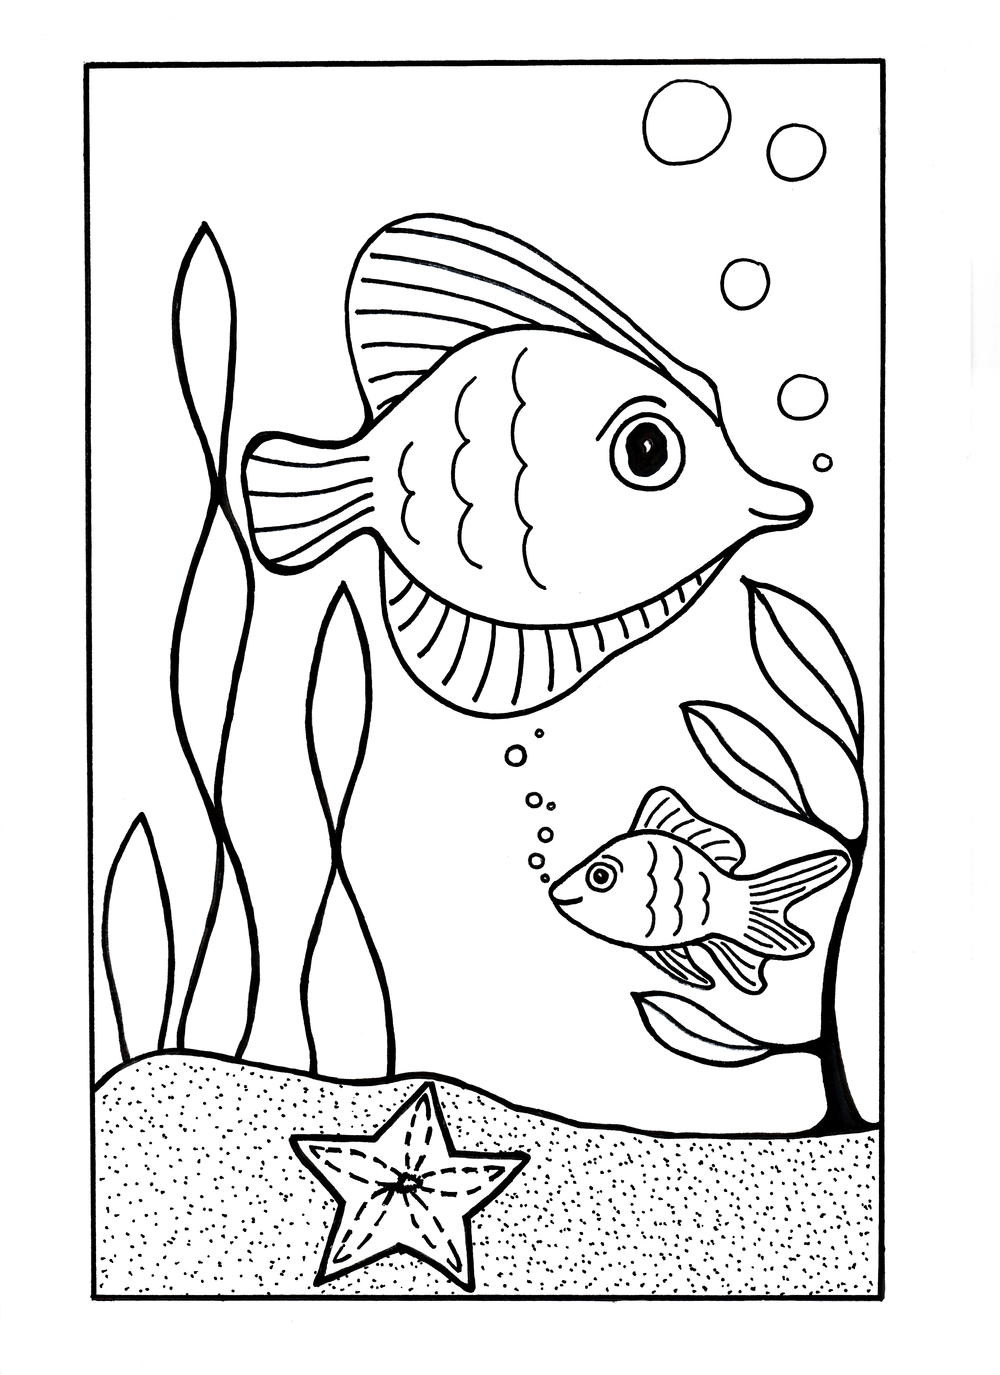 Printable Coloring Pages For Kids Animals
 Under the Sea Coloring Page